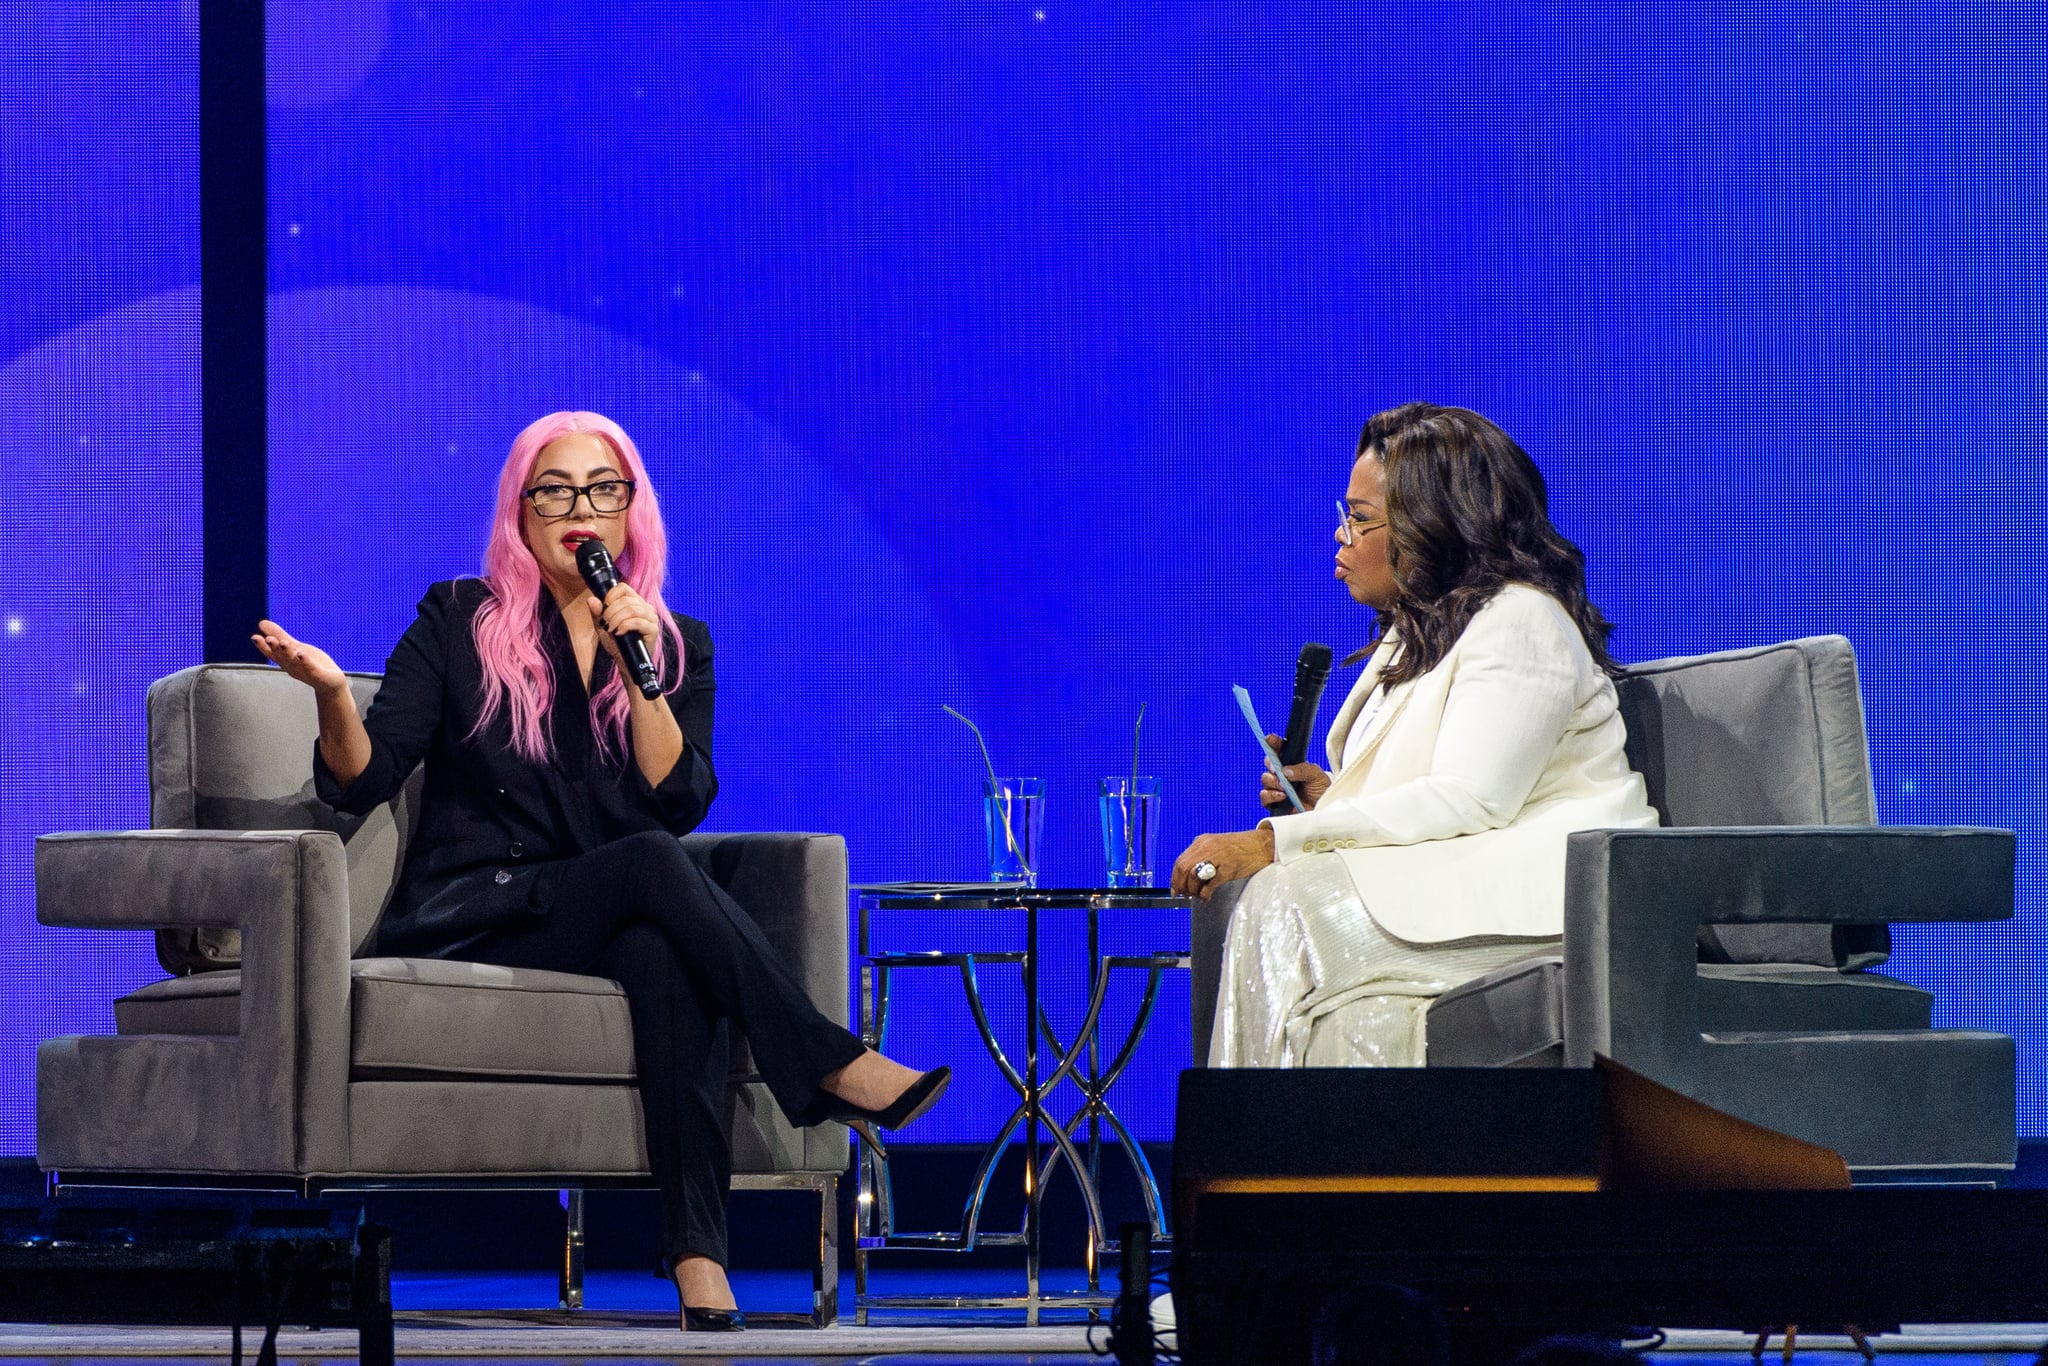 SUNRISE, FL - JANUARY 04: (EXCLUSIVE COVERAGE) Lady Gaga and Oprah Winfrey speak during the WW (Weight Watchers Reimagined) & Oprah's 2020 Vision: Your Life In Focus Tour at BB&T Center on January 4, 2020 in Sunrise, Florida.  (Photo by Jason Koerner/Getty Images for Oprah)